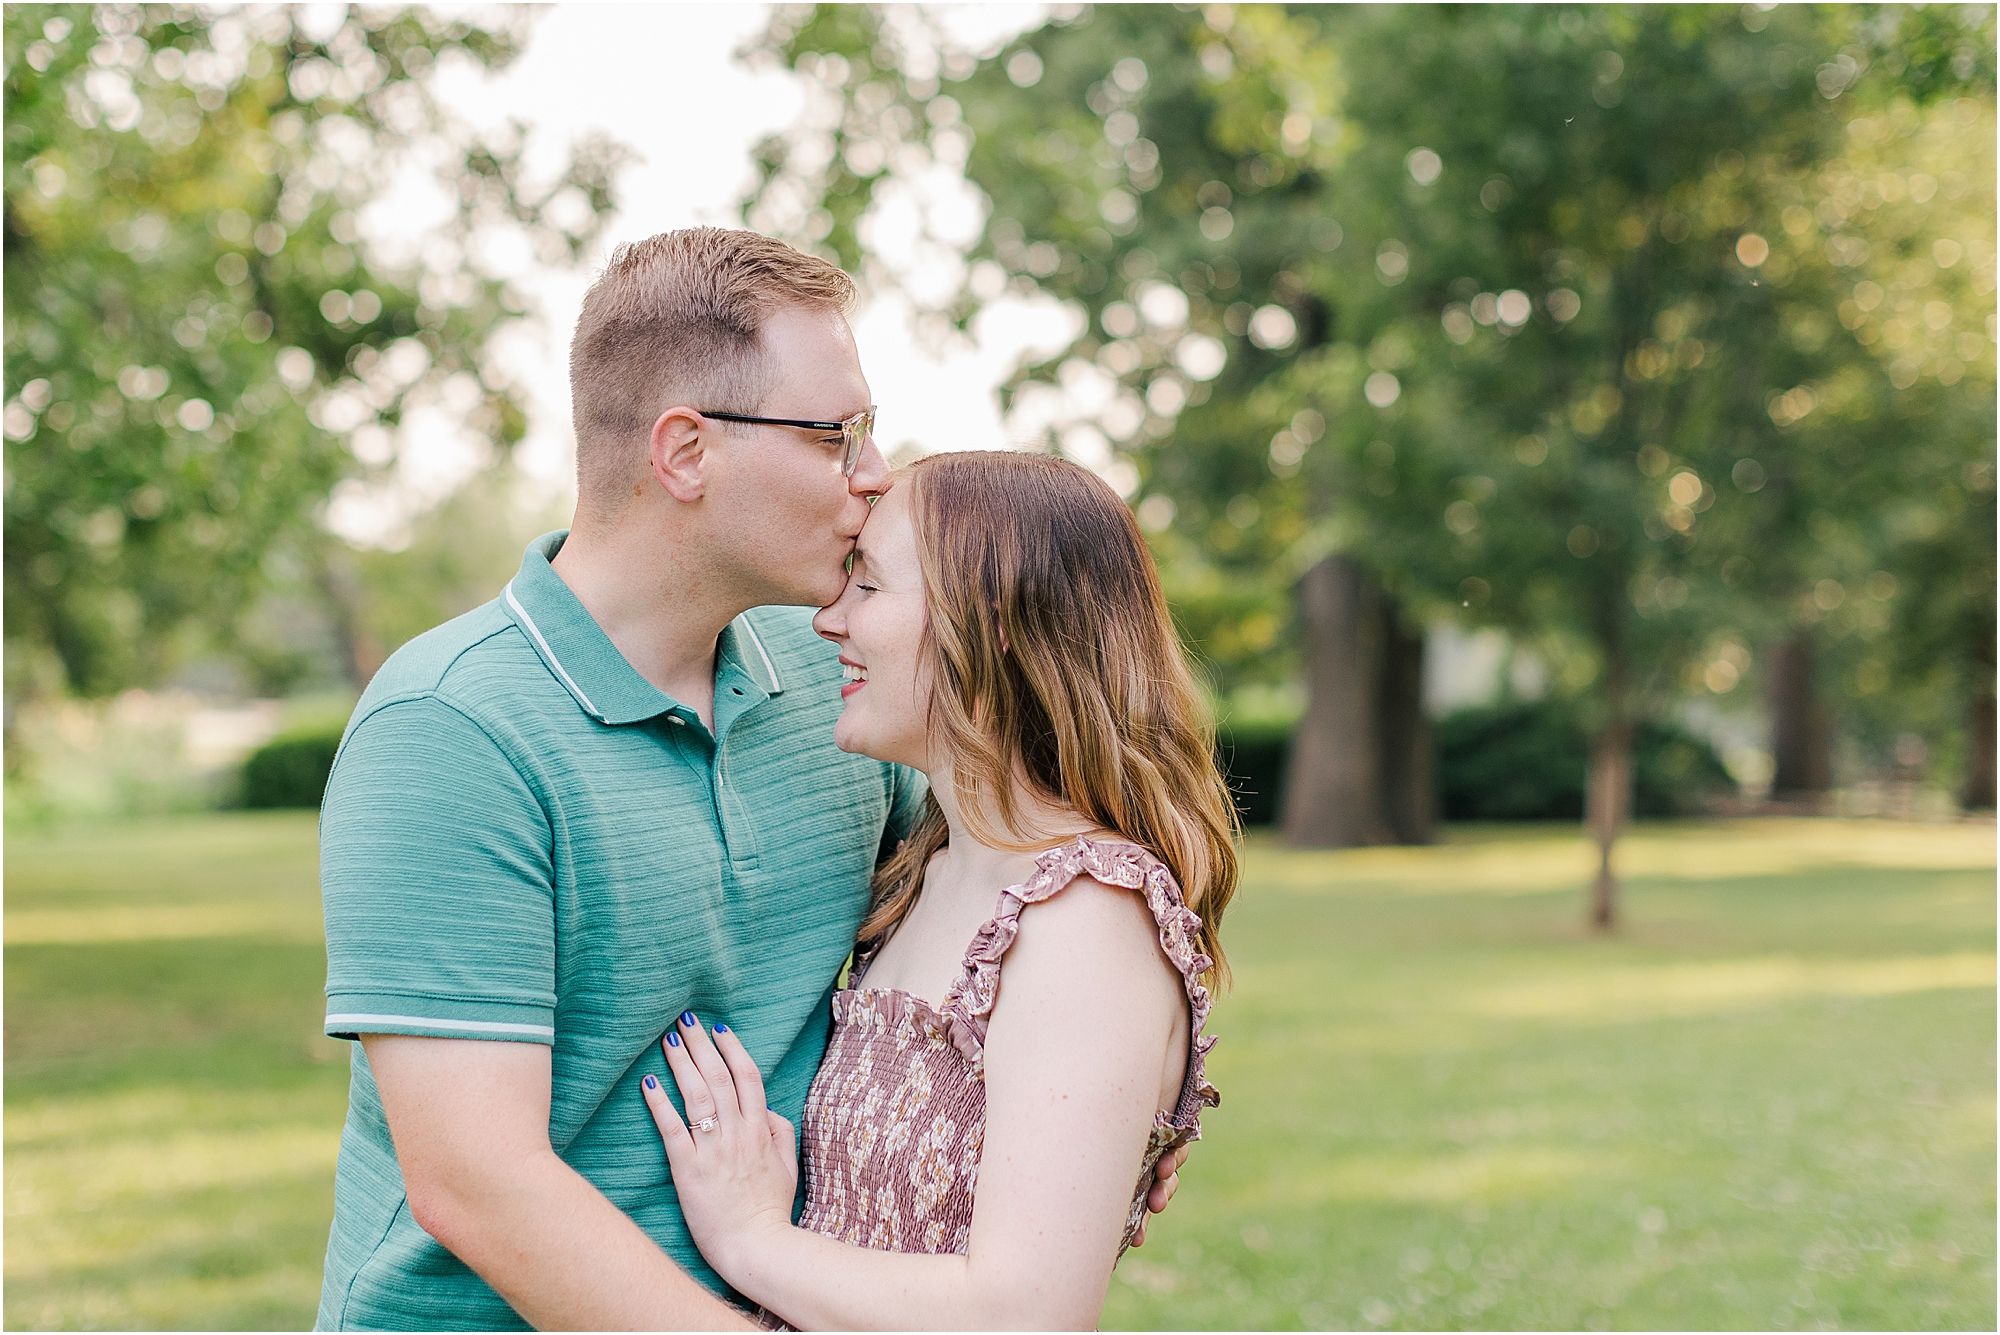 Mom and dad sharing a kiss at woodward park during their summer family photo session.